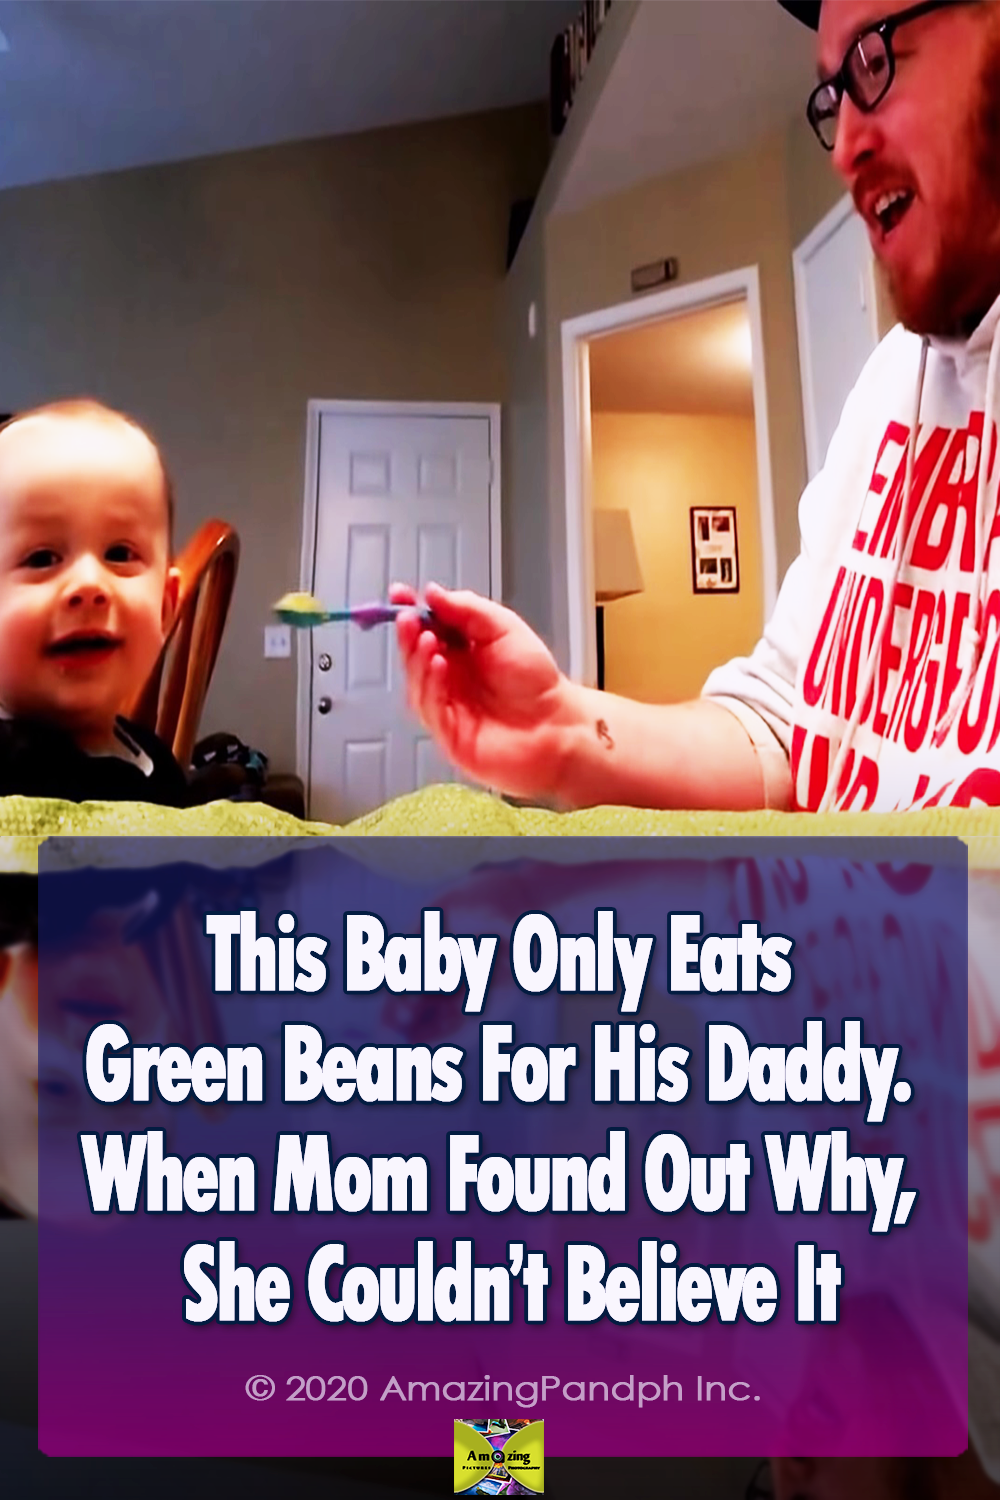 Babies, Green, Beans, Adorable, voice, father, daddy,